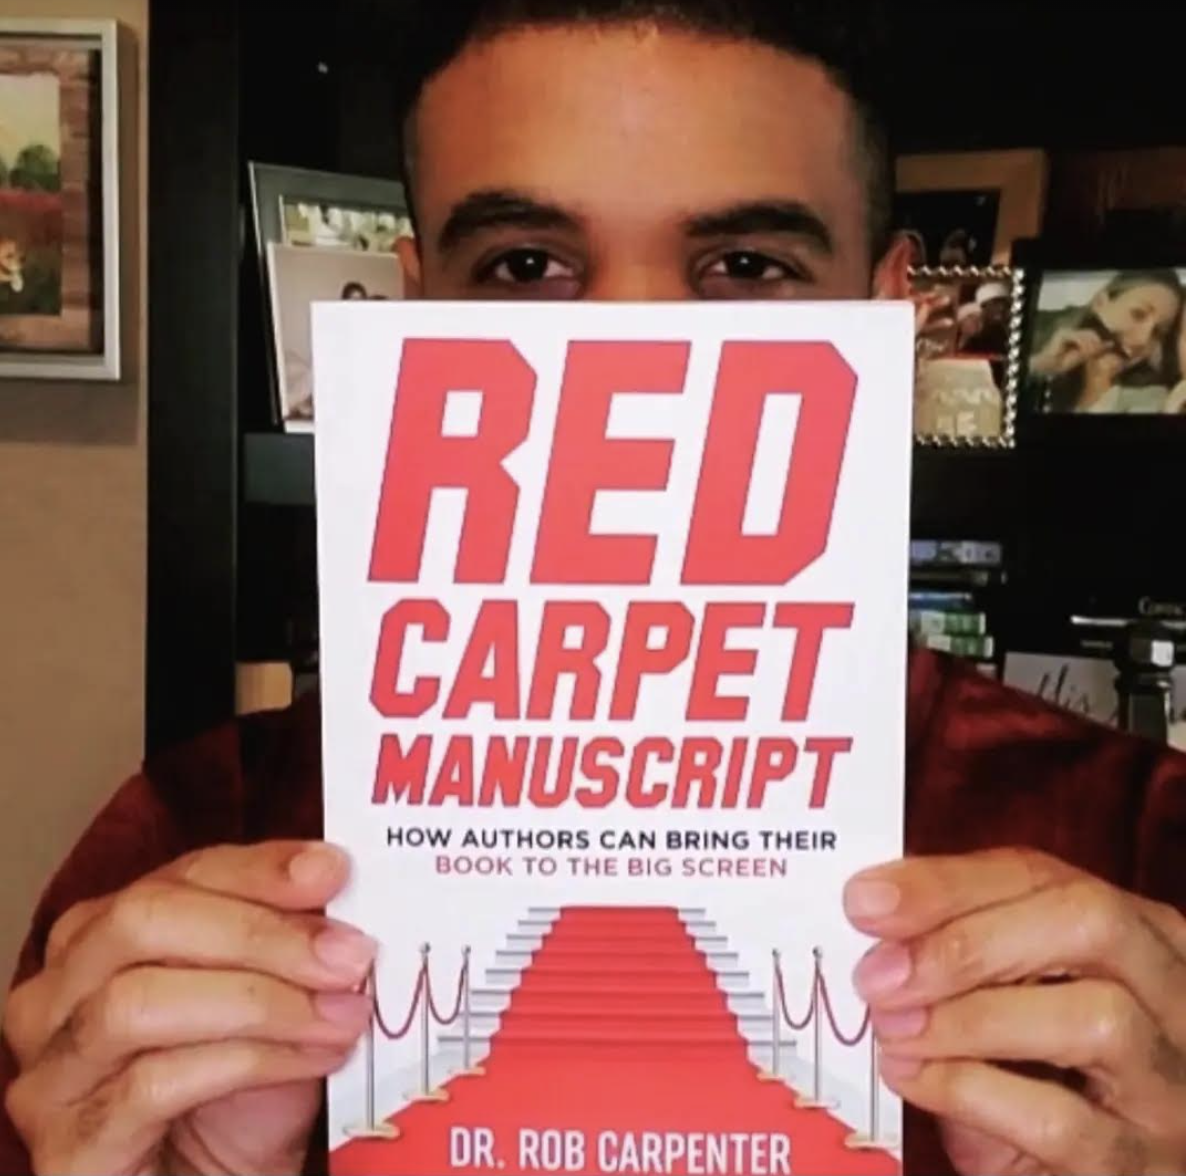 Dr. Rob with his book, "Red Carpet Manuscript"